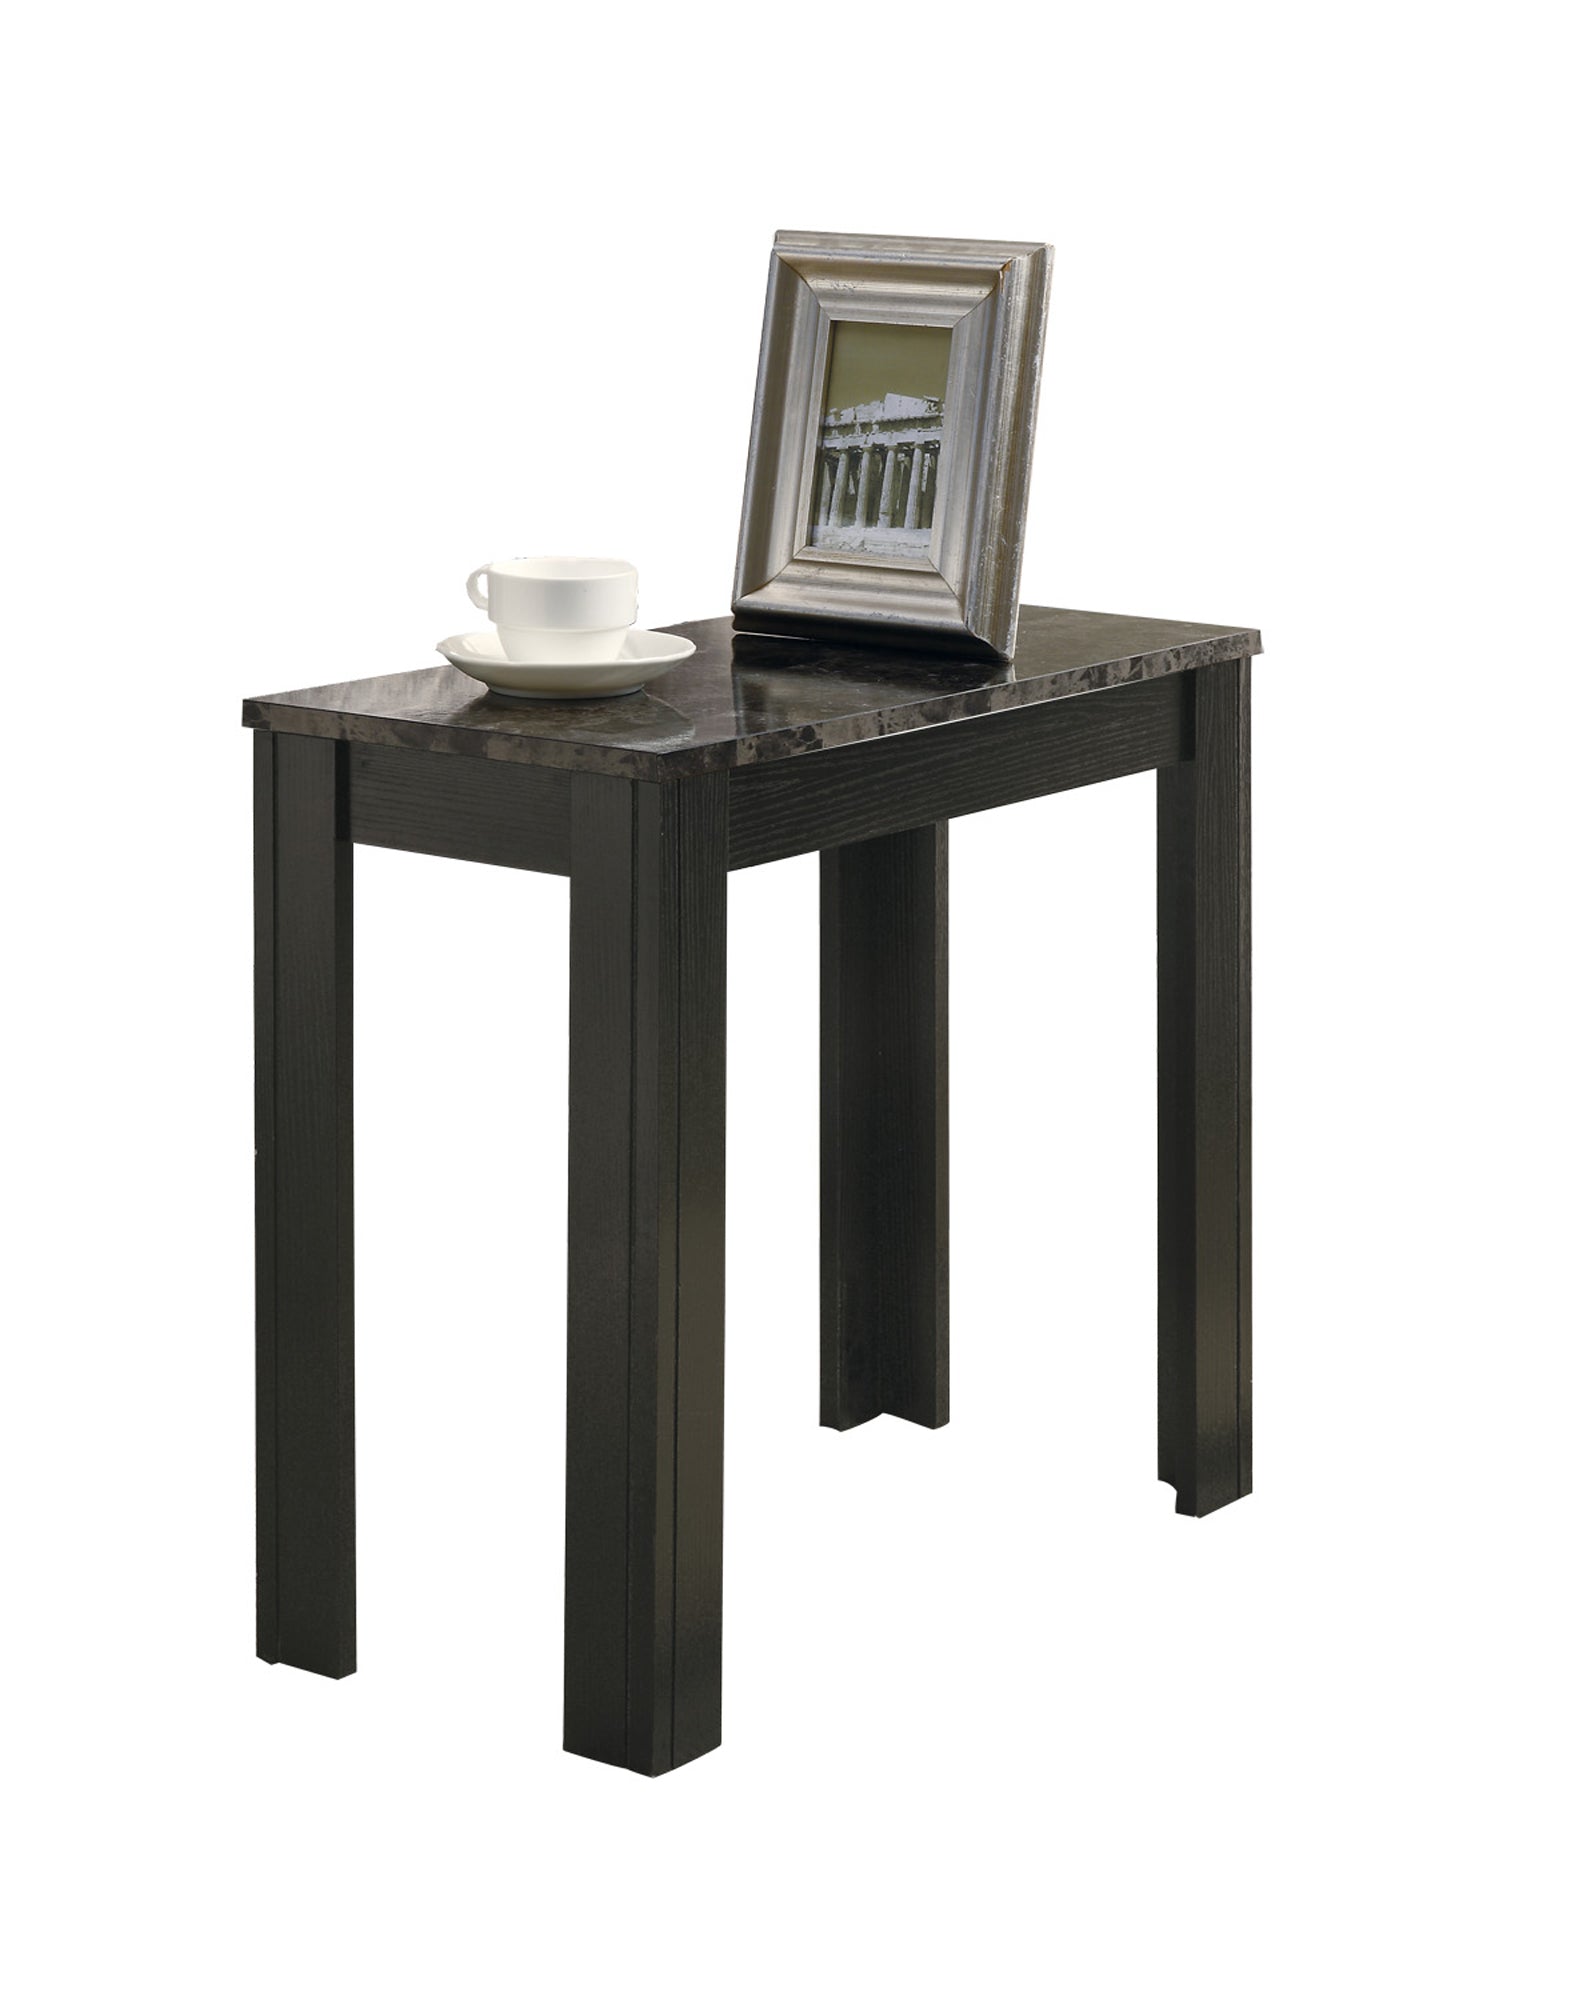 MN-313112    Accent Table, Side, End, Nightstand, Lamp, Living Room, Bedroom, Laminate, Black, Black, Transitional